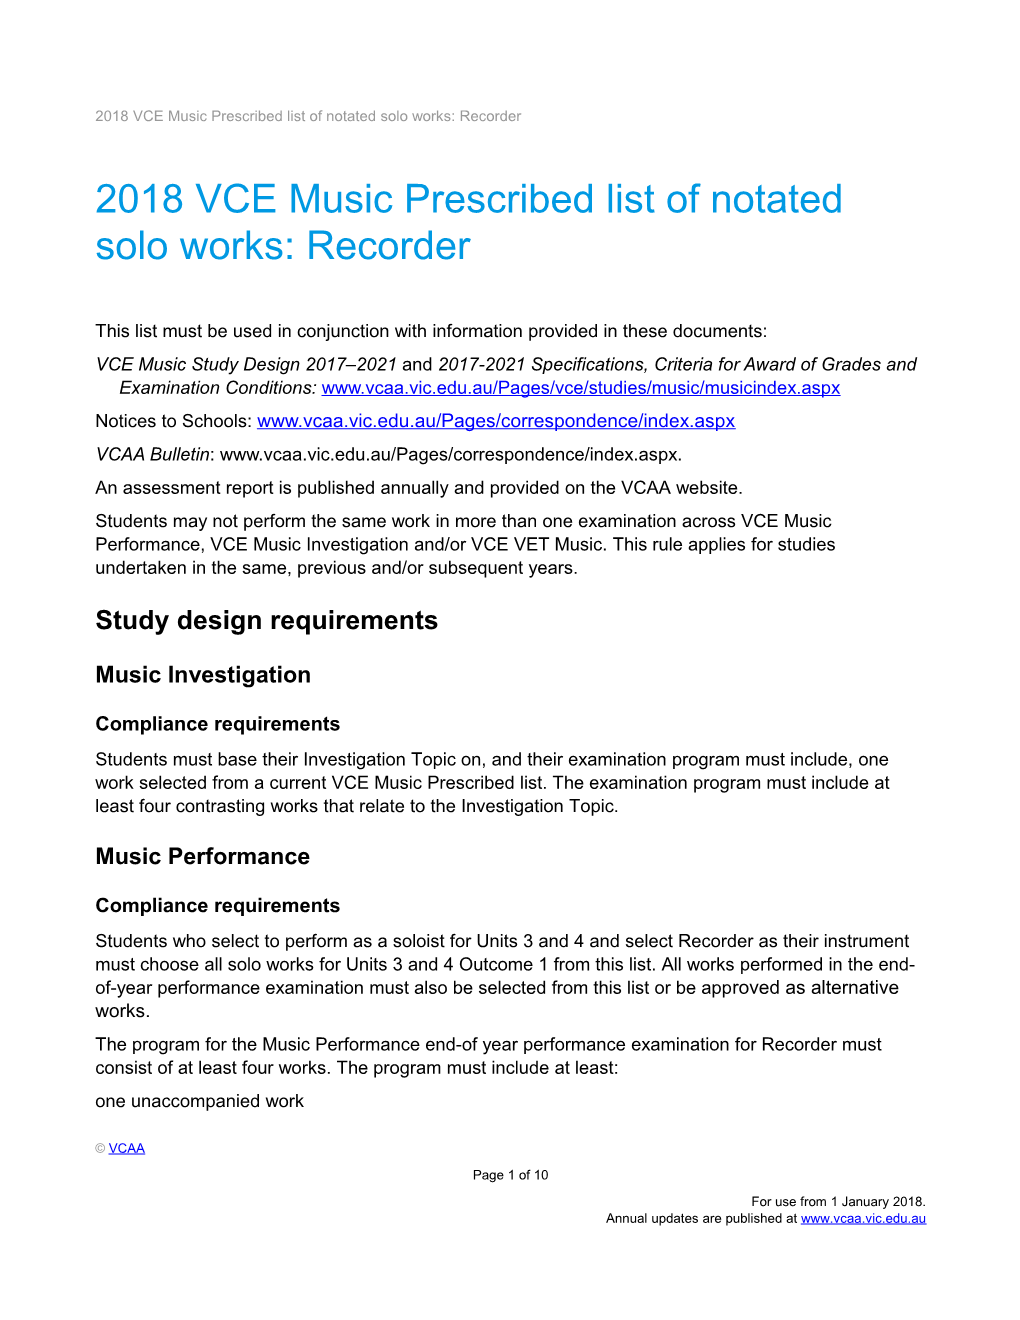 2018 VCE Music Prescribed List of Notated Solo Works: Recorder